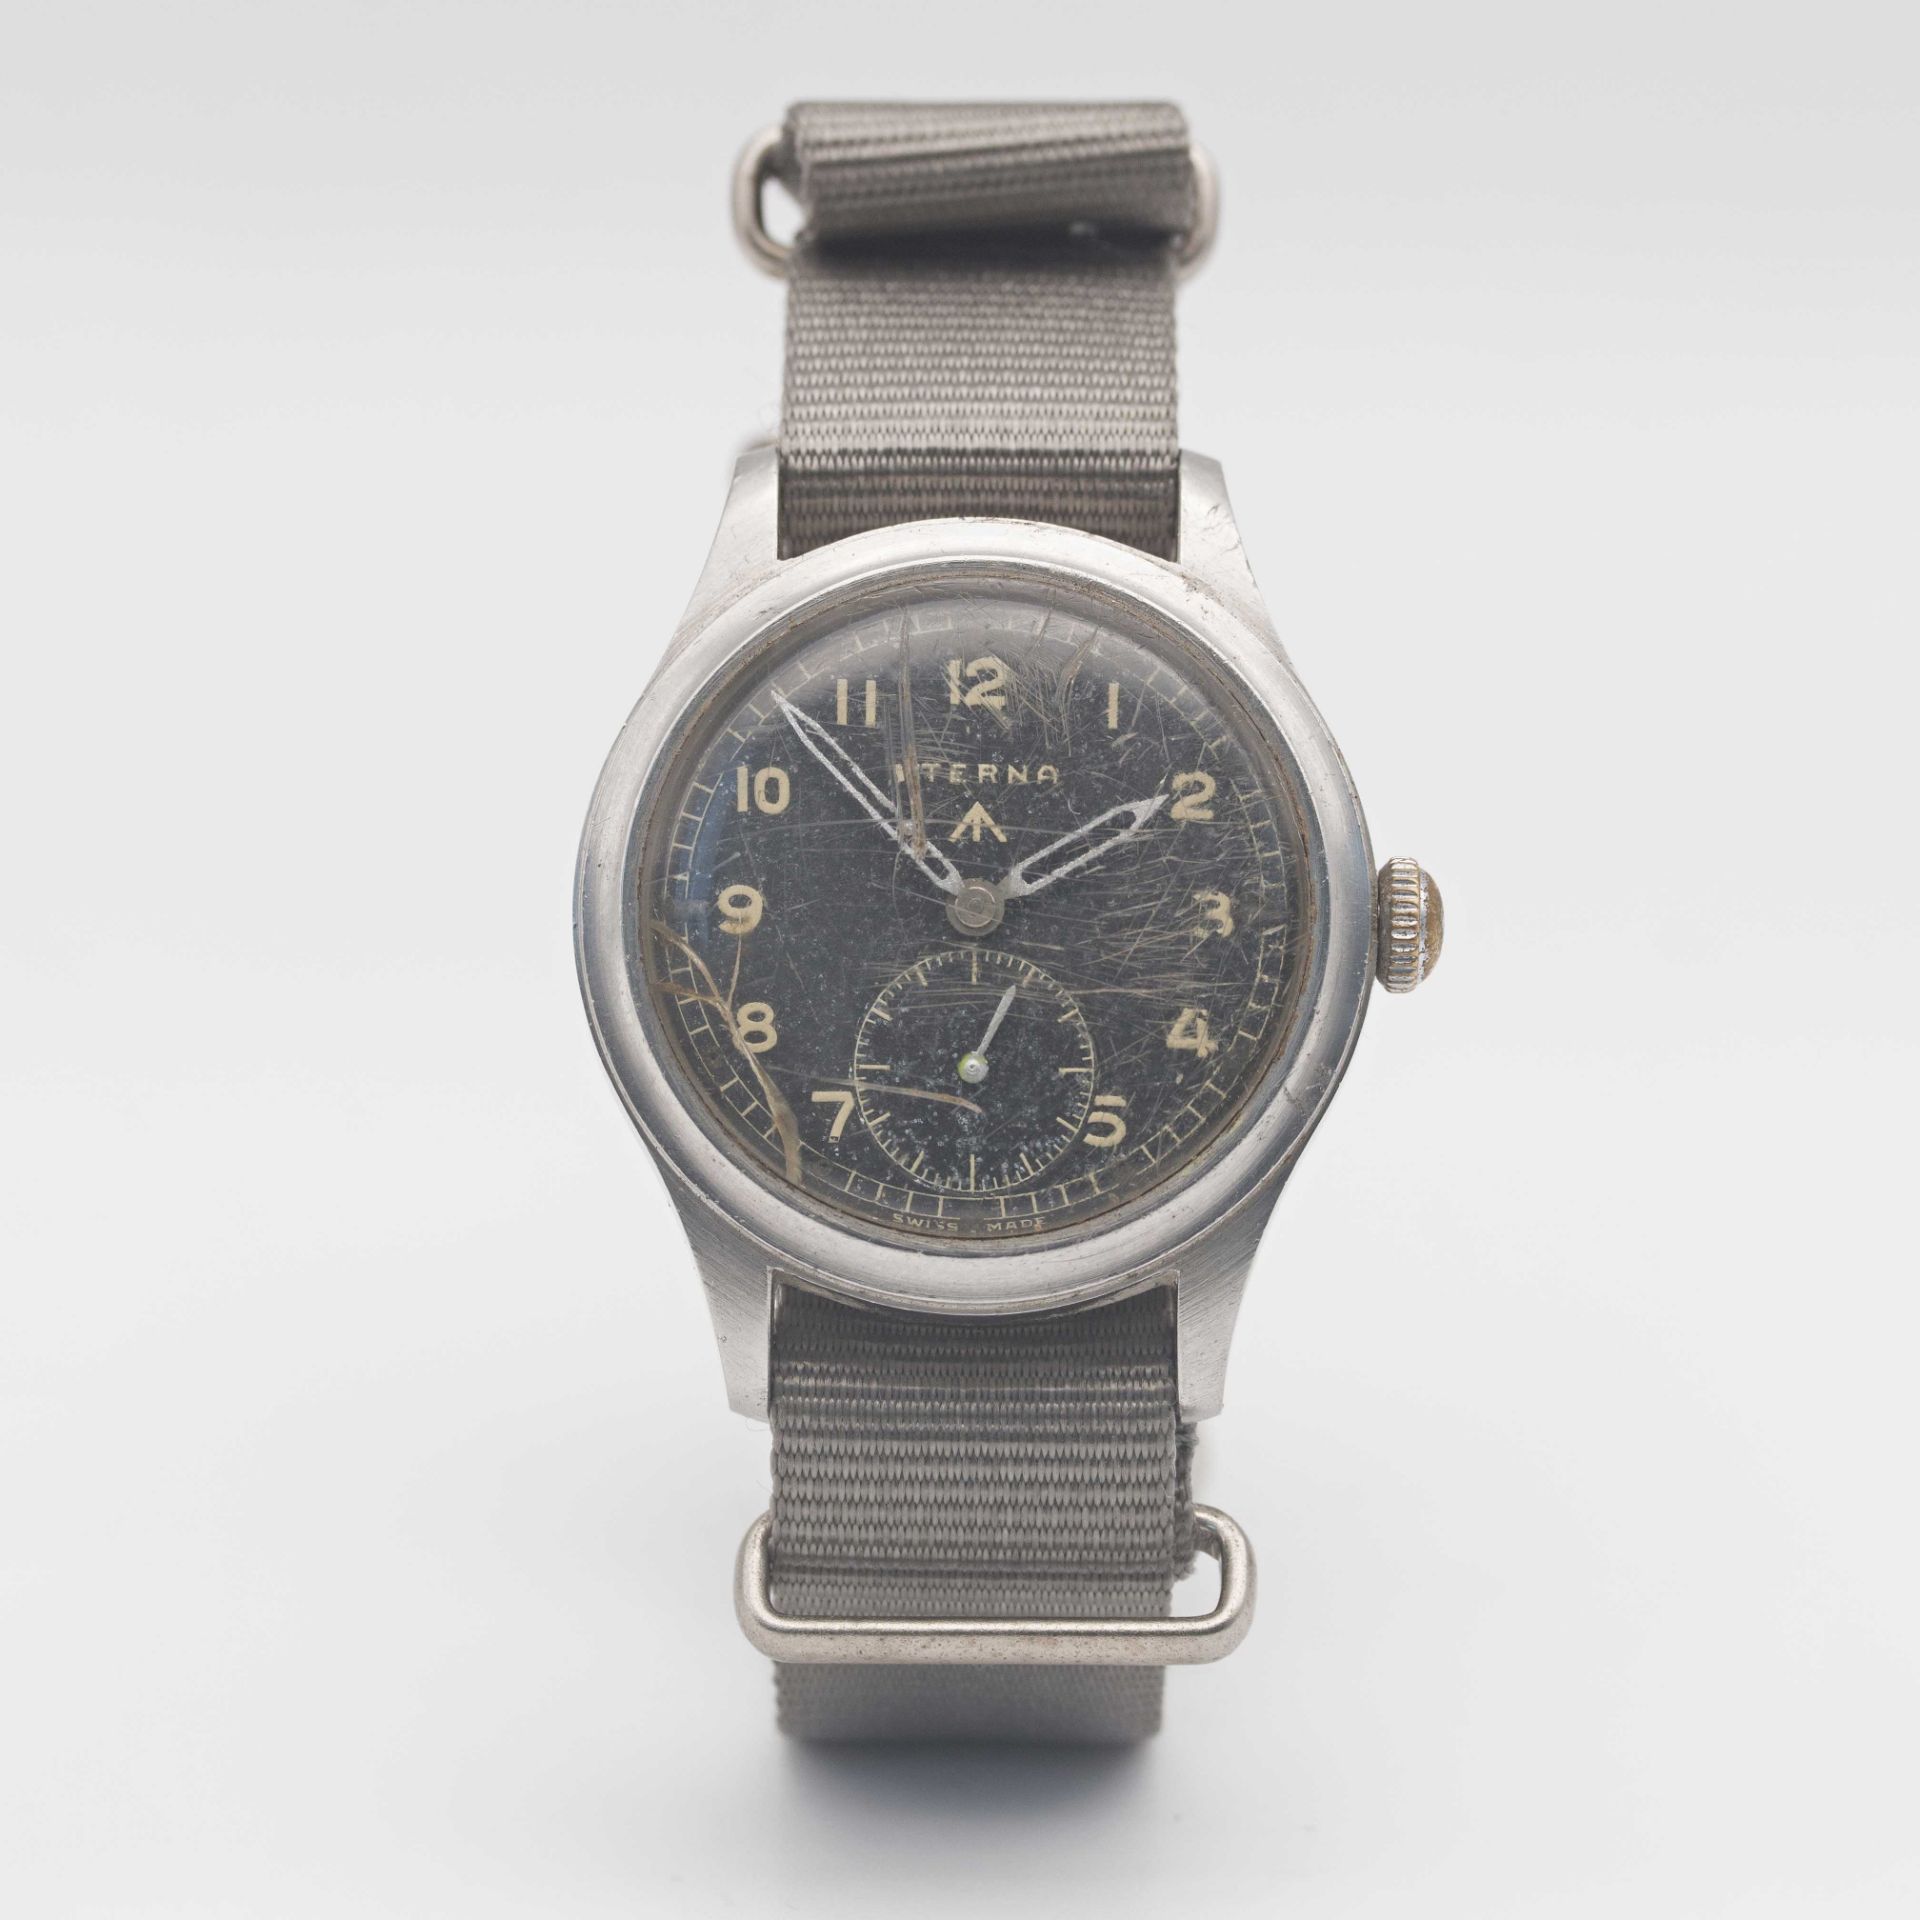 A GENTLEMAN'S STAINLESS STEEL BRITISH MILITARY ETERNA W.W.W. WRIST WATCH CIRCA 1940s, PART OF THE " - Image 2 of 10